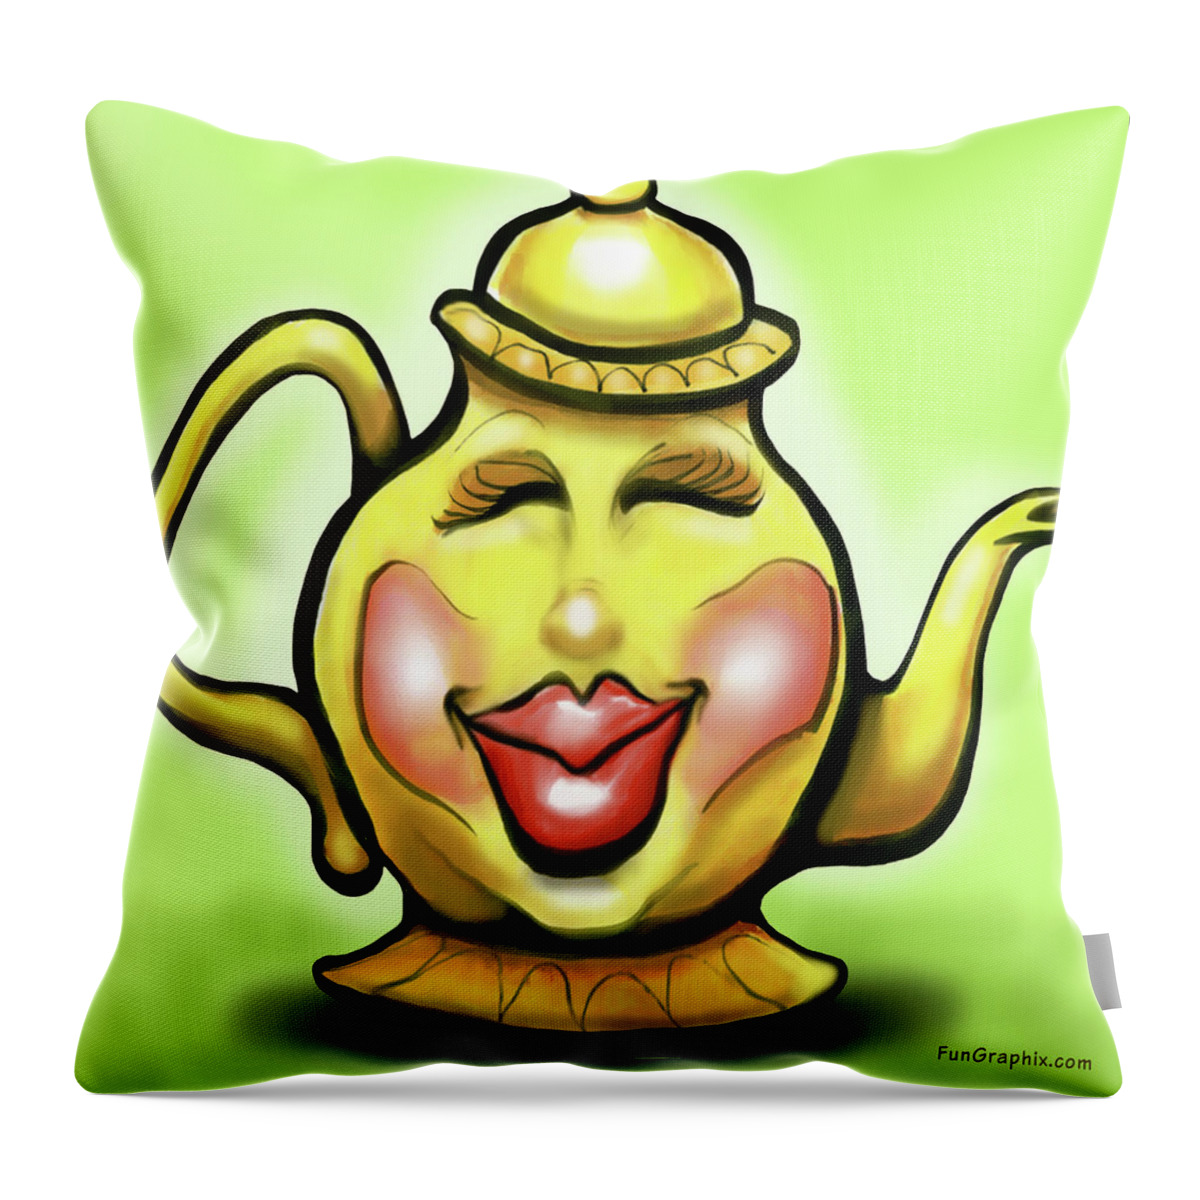 Tea Throw Pillow featuring the digital art Teapot by Kevin Middleton